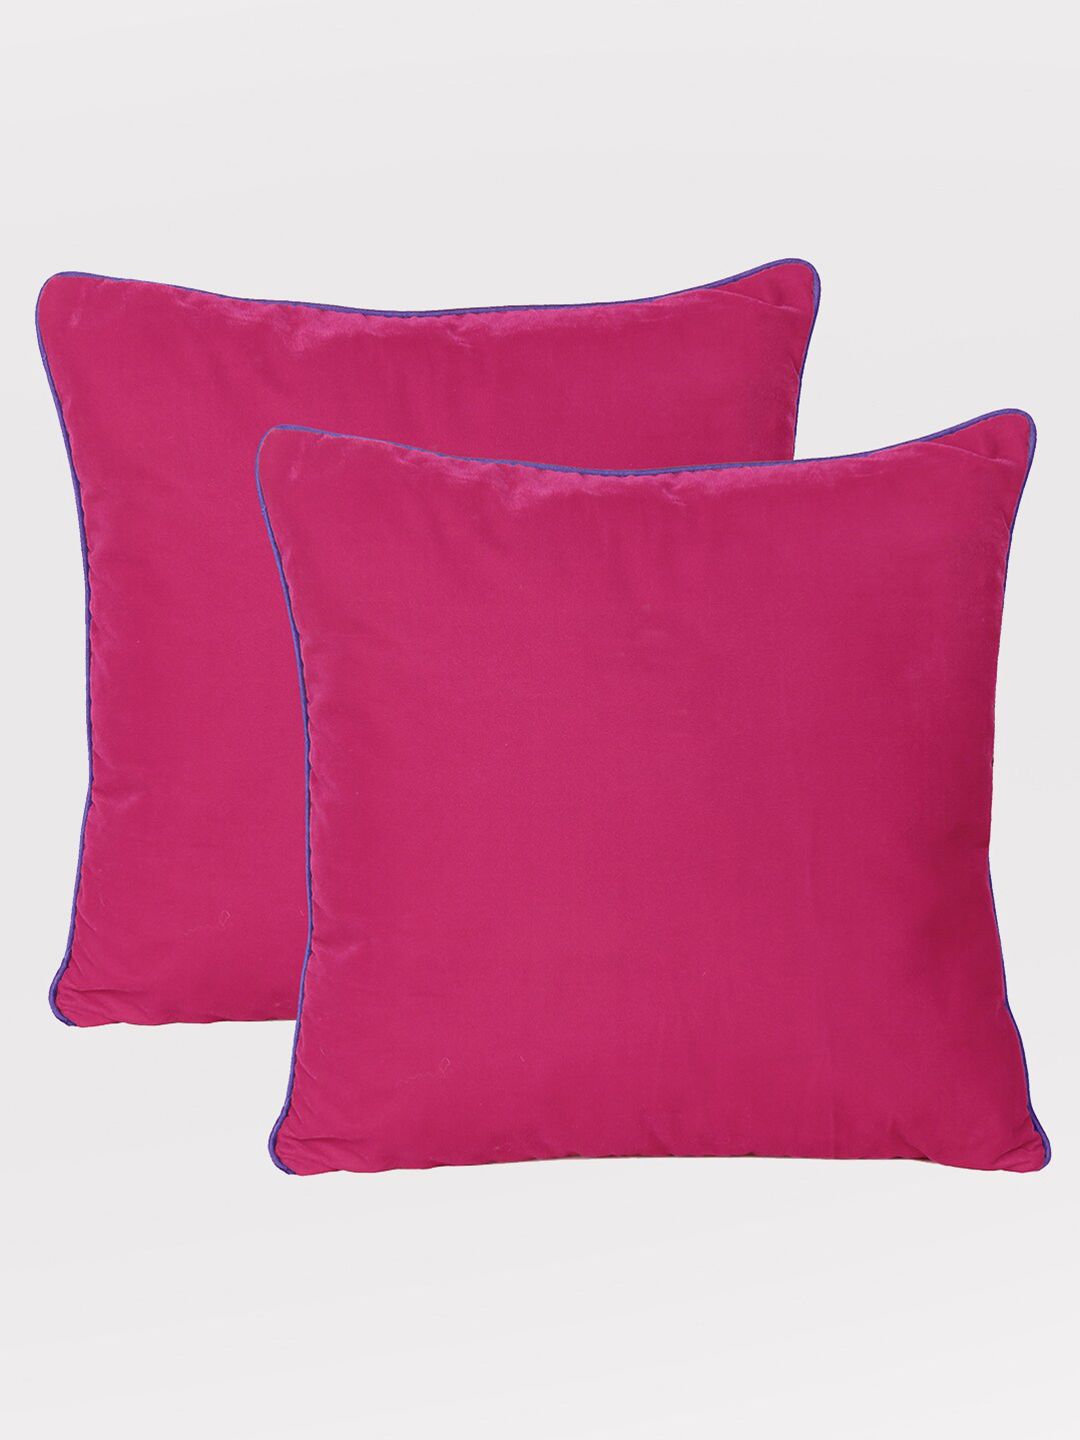 OUSSUM Pink Set of 2 Velvet Square Cushion Covers Price in India